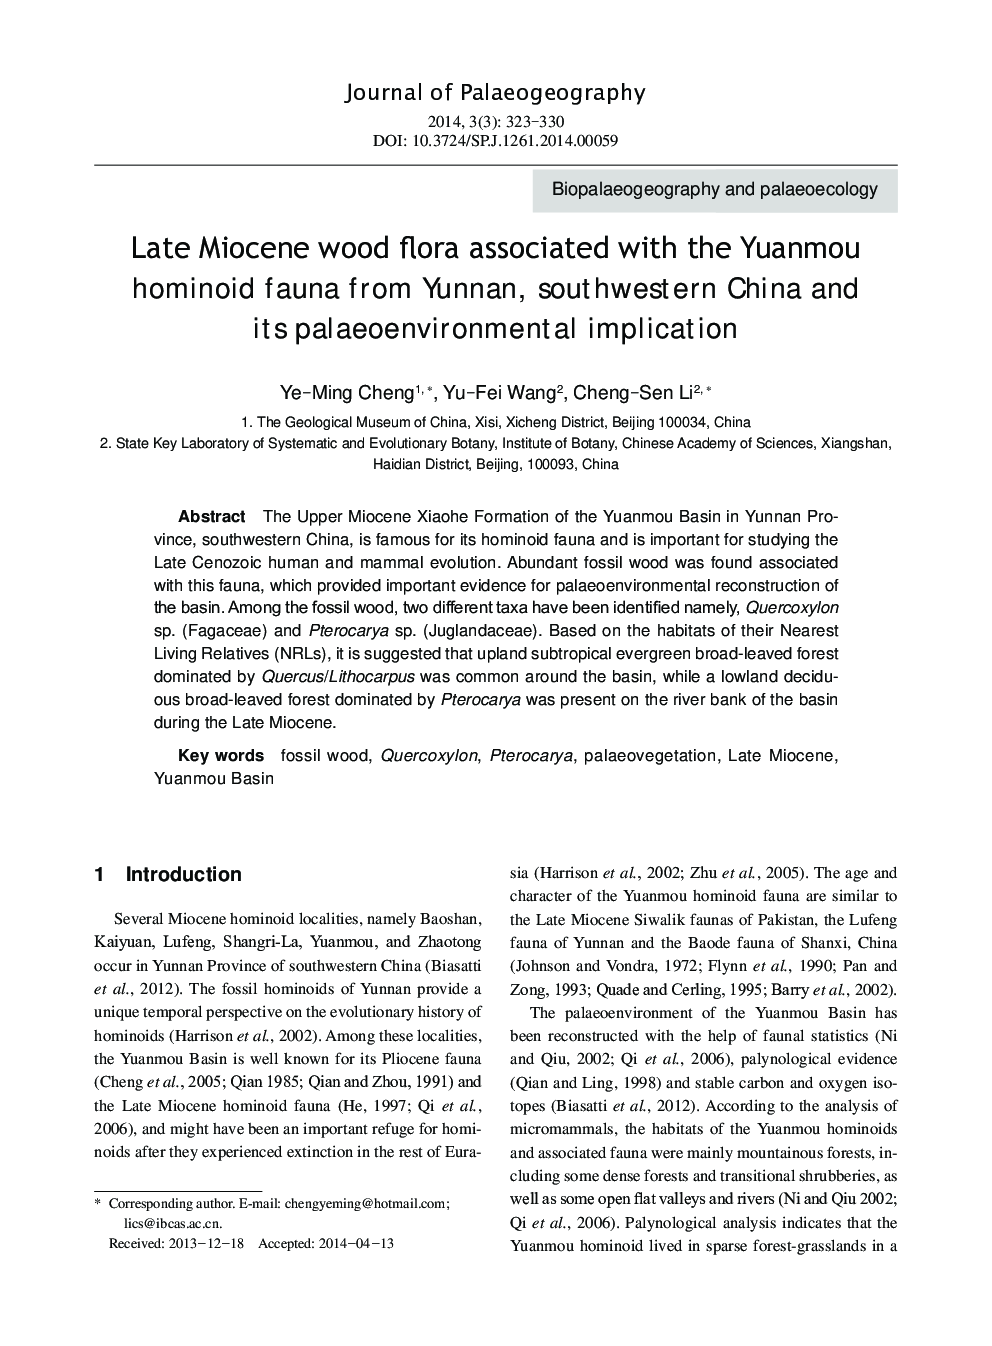 Late Miocene wood flora associated with the Yuanmou hominoid fauna from Yunnan, southwestern China and its palaeoenvironmental implication